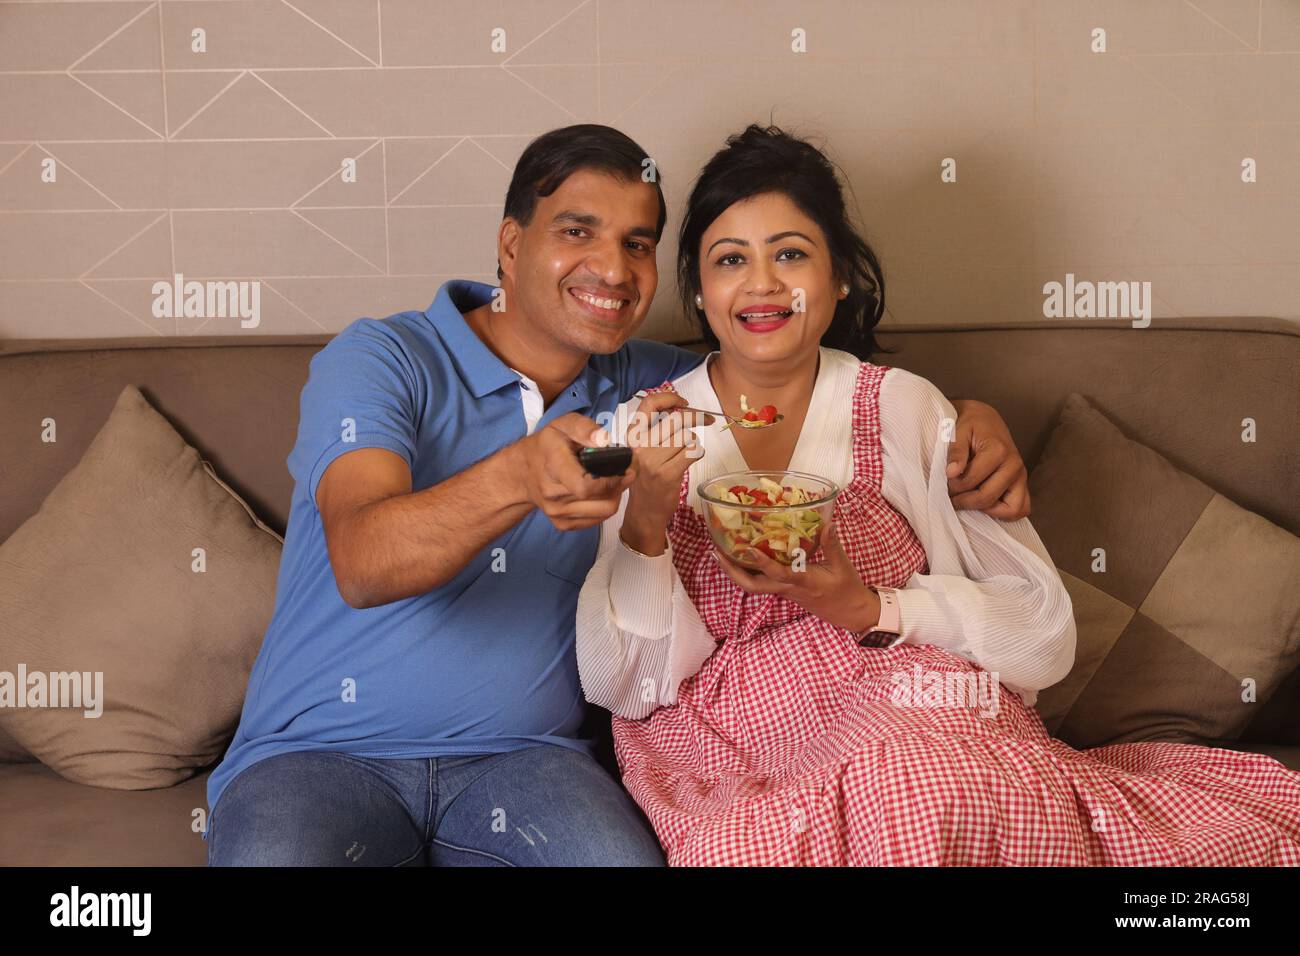 Happy Indian health conscious Husband wife sitting together having a bowl of green salad sitting on couch in a living room Stock Photo